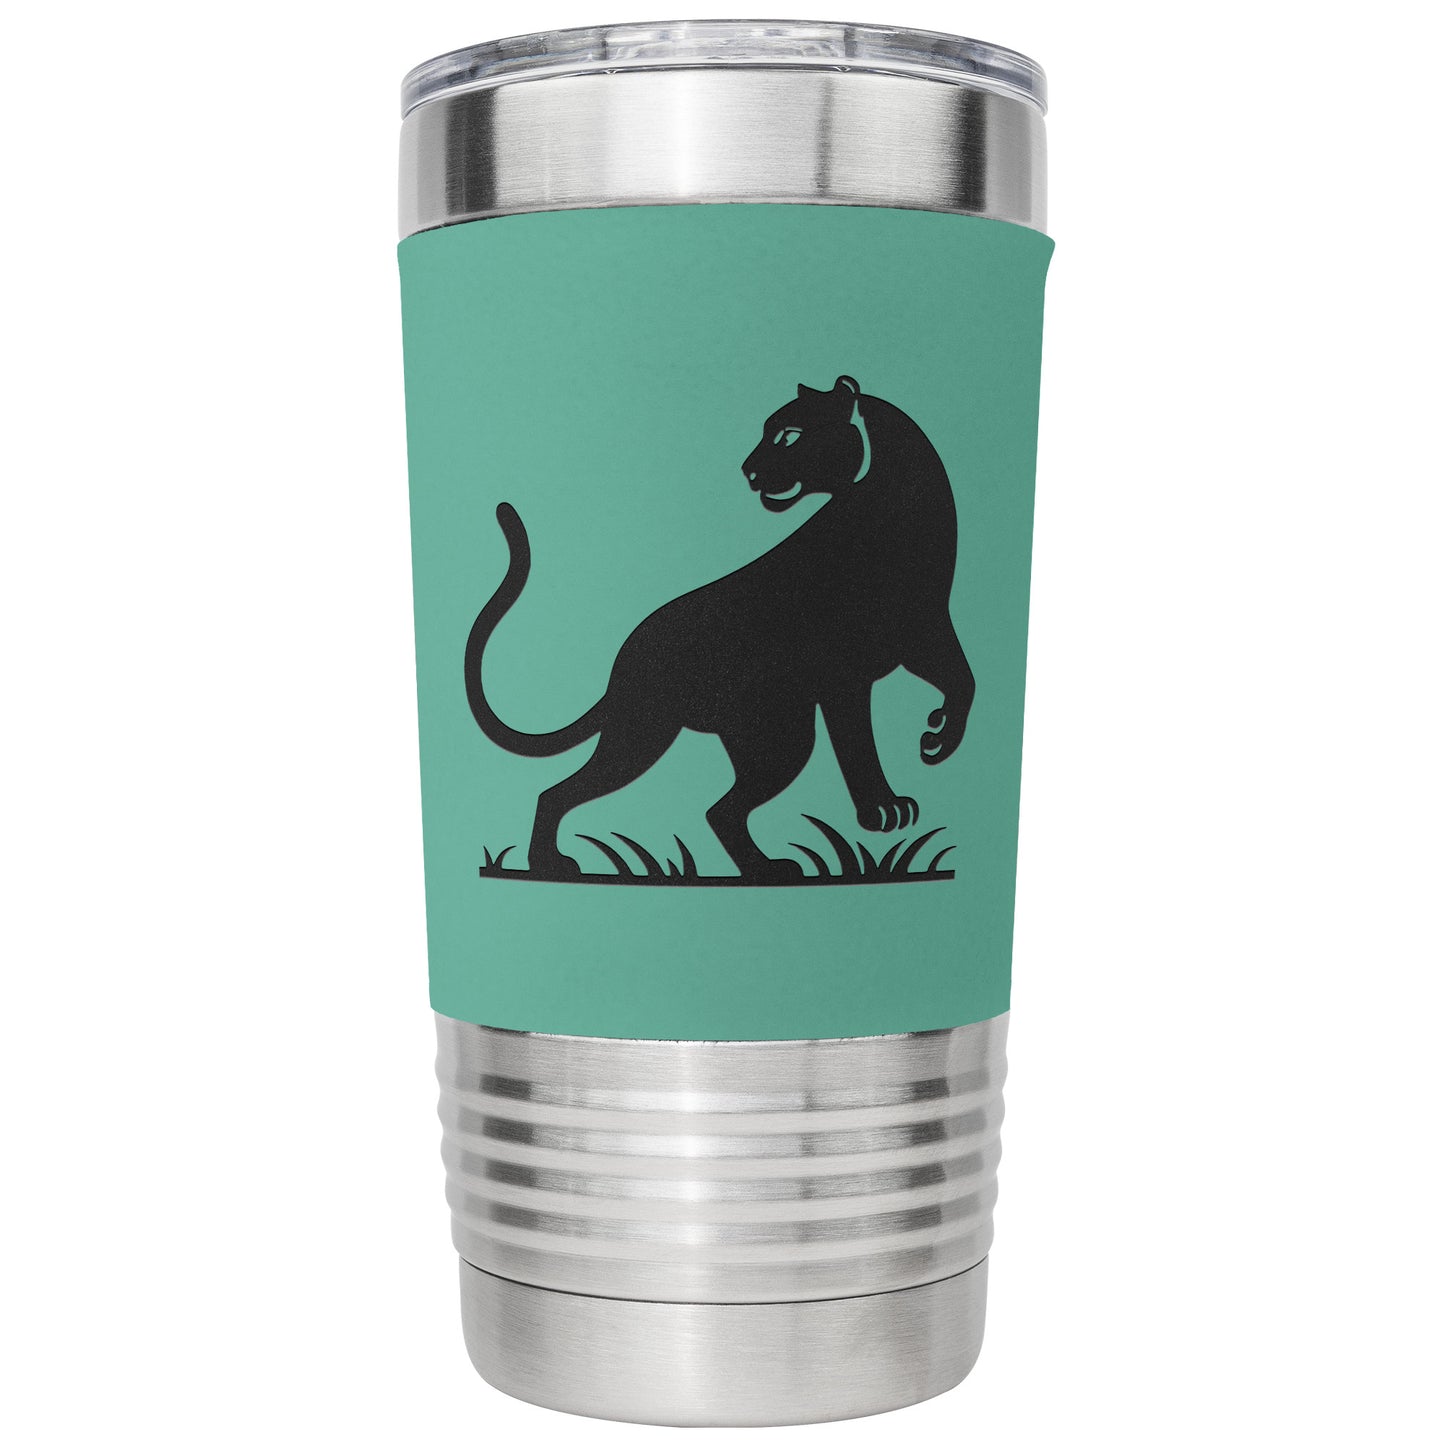 Wild Animals - Tumblers - The Black Panther #1